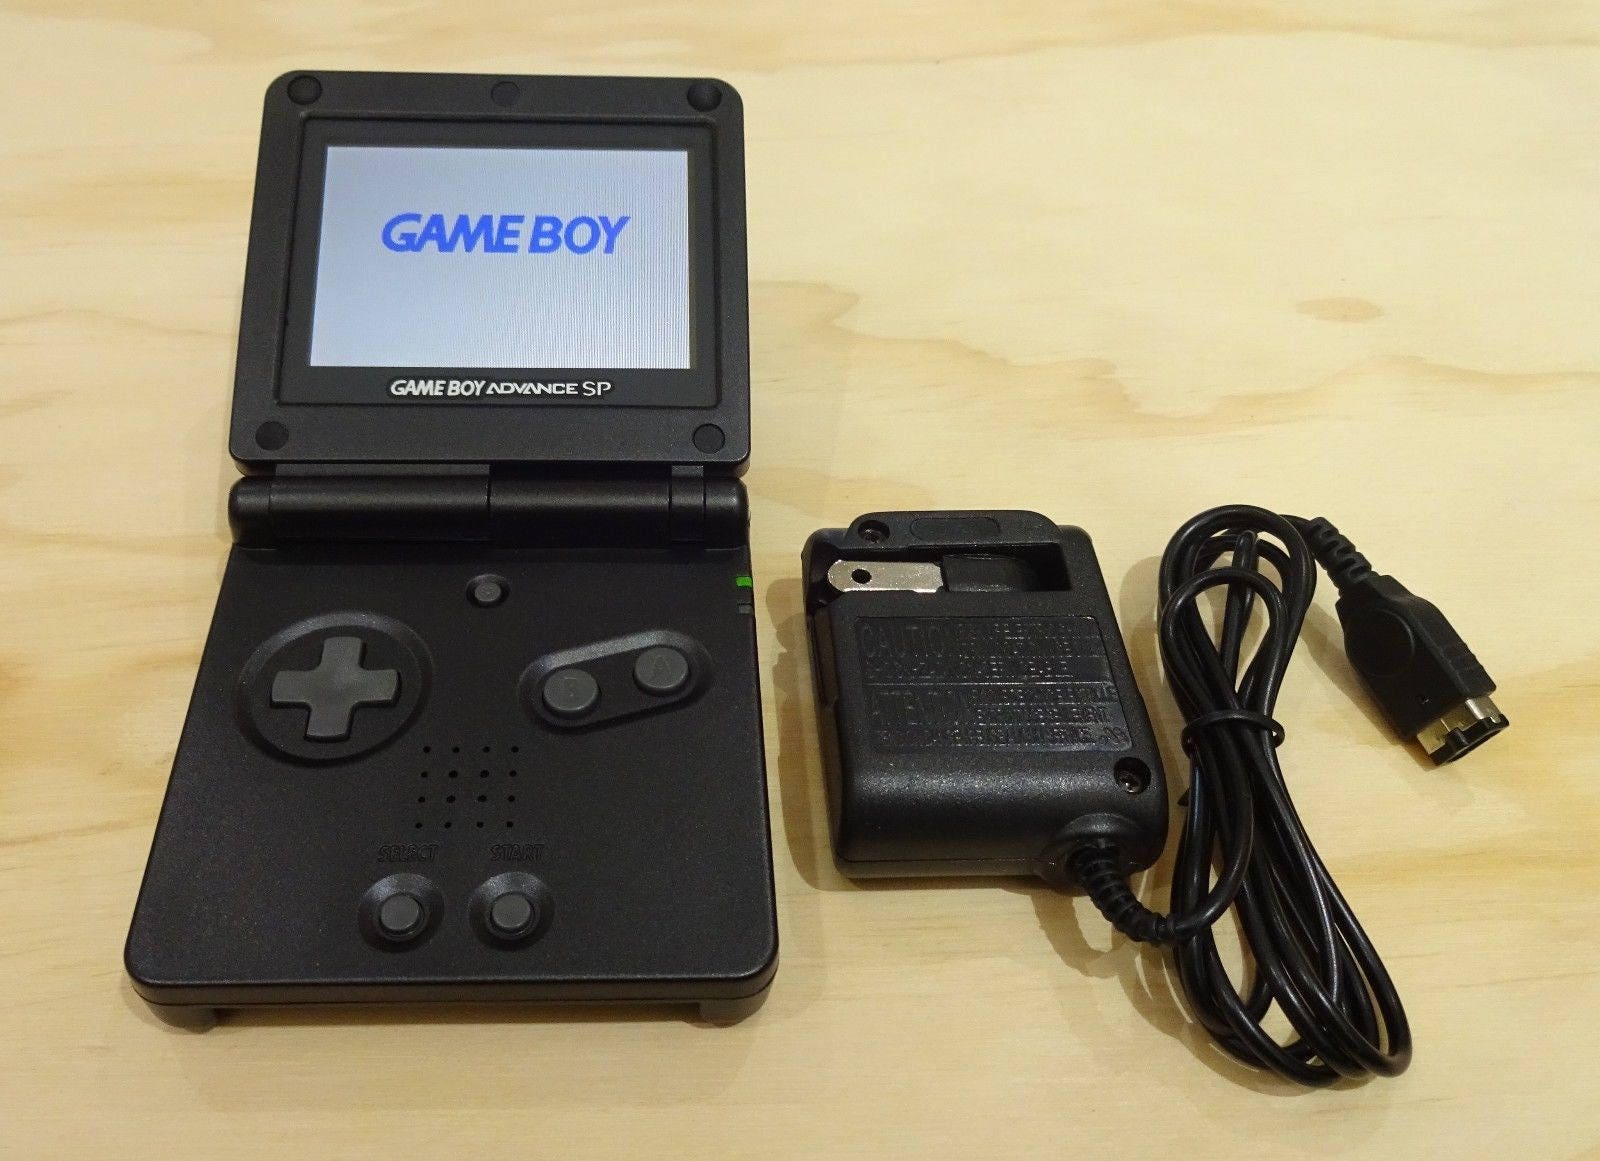 Game Boy Advance SP (AGS) - Game Boy hardware database